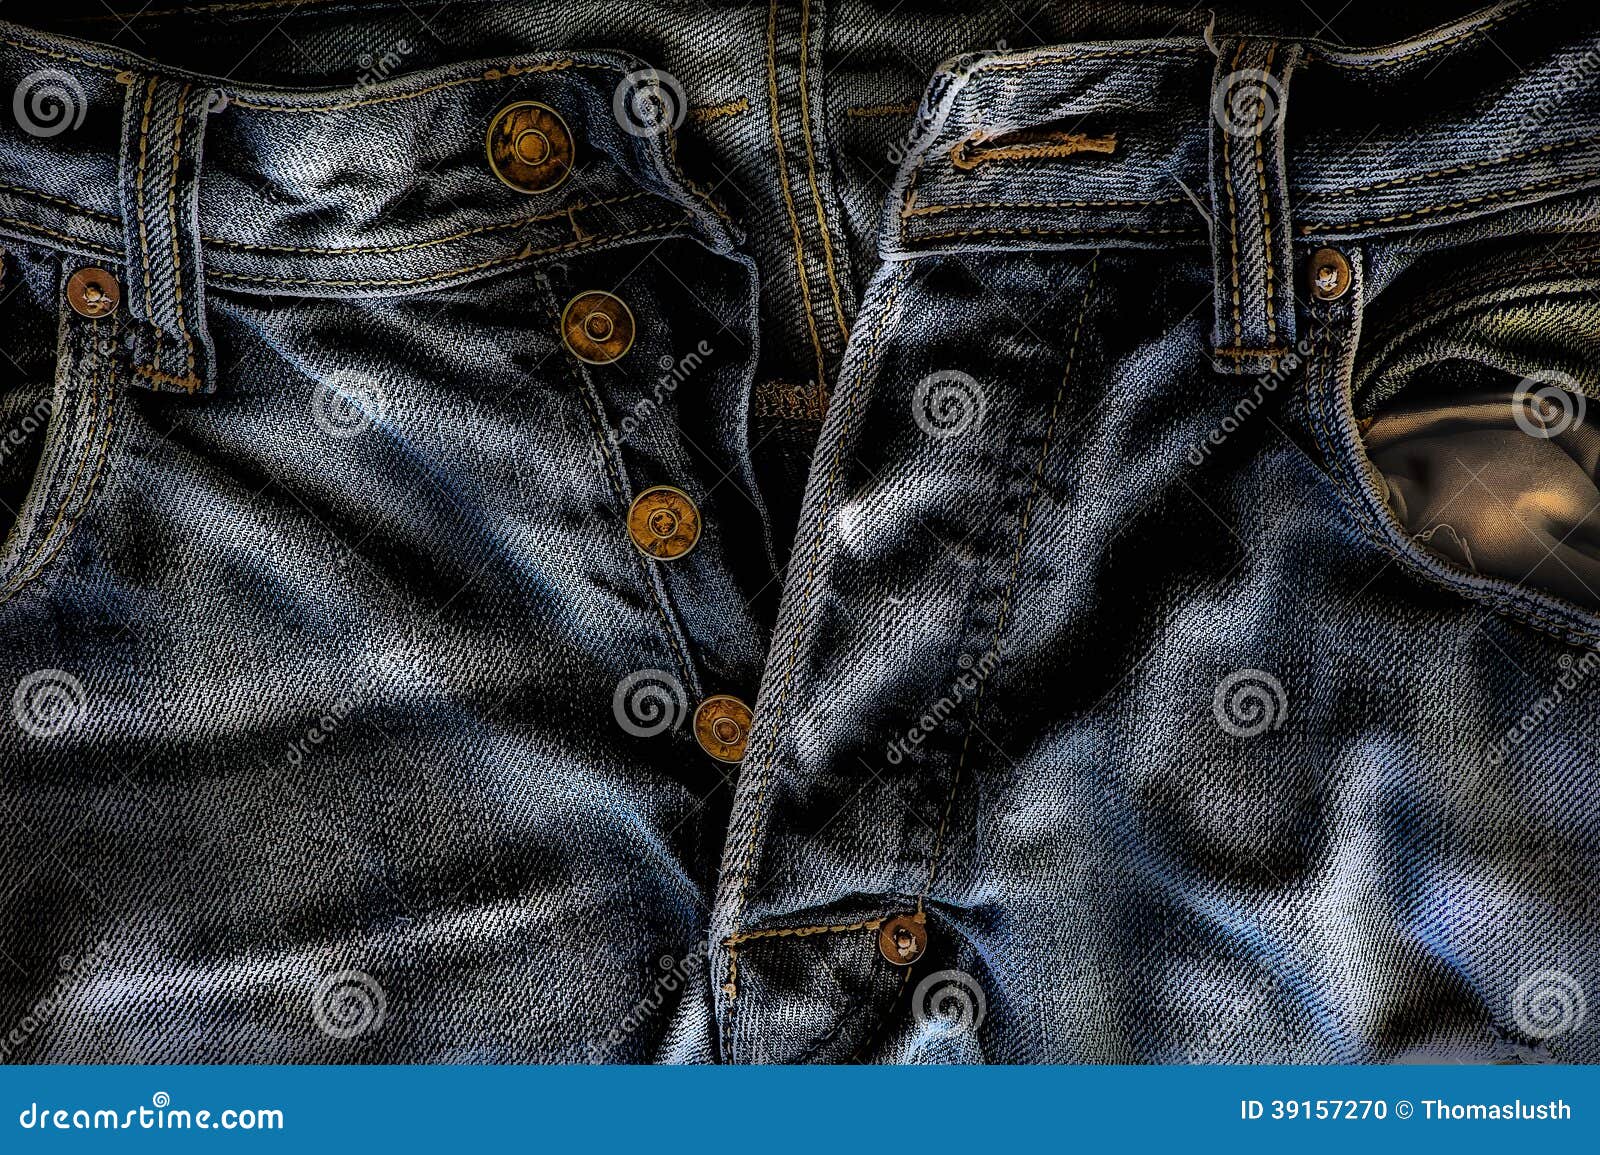 My old jeans stock photo. Image of casual, blue, apparel - 39157270